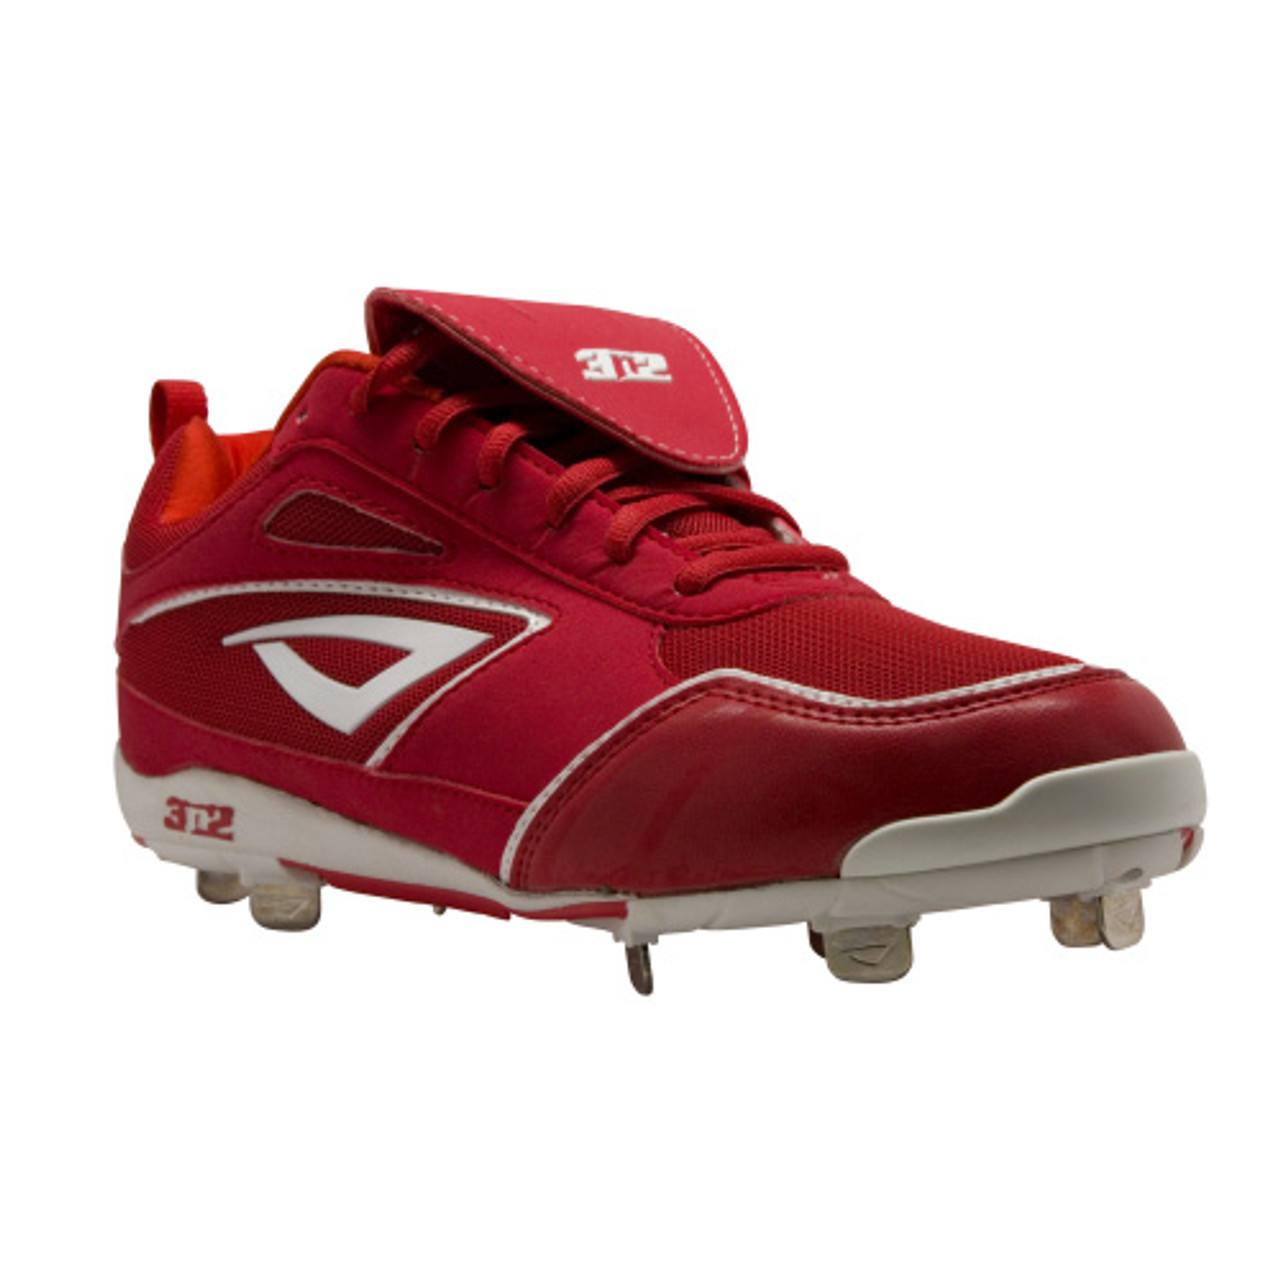 Rally Metal Fastpitch Softball Cleats by 3N2